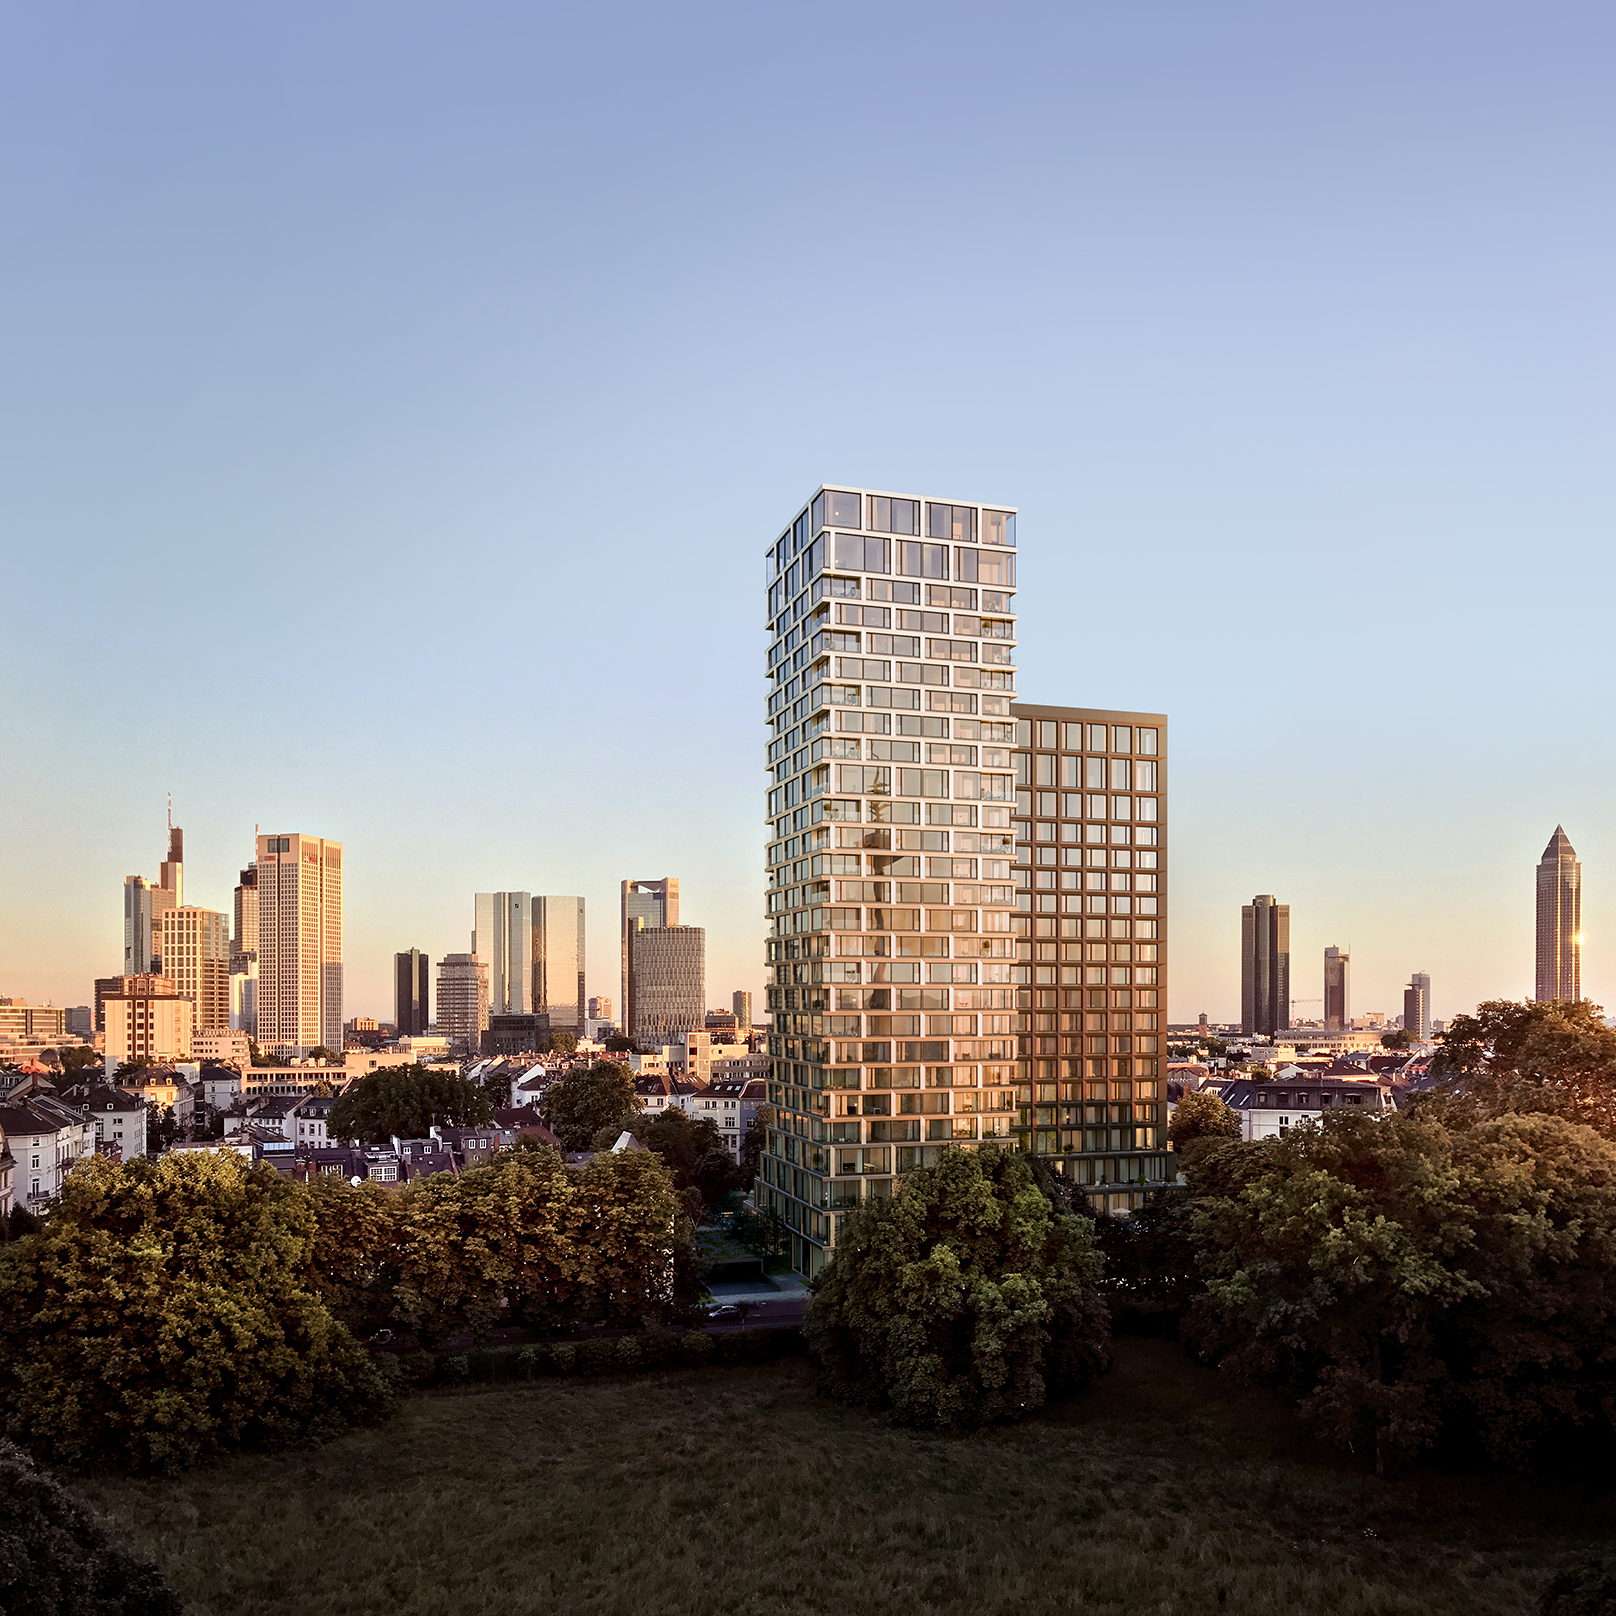 Roomers ParkView Frankfurt Coming Soon